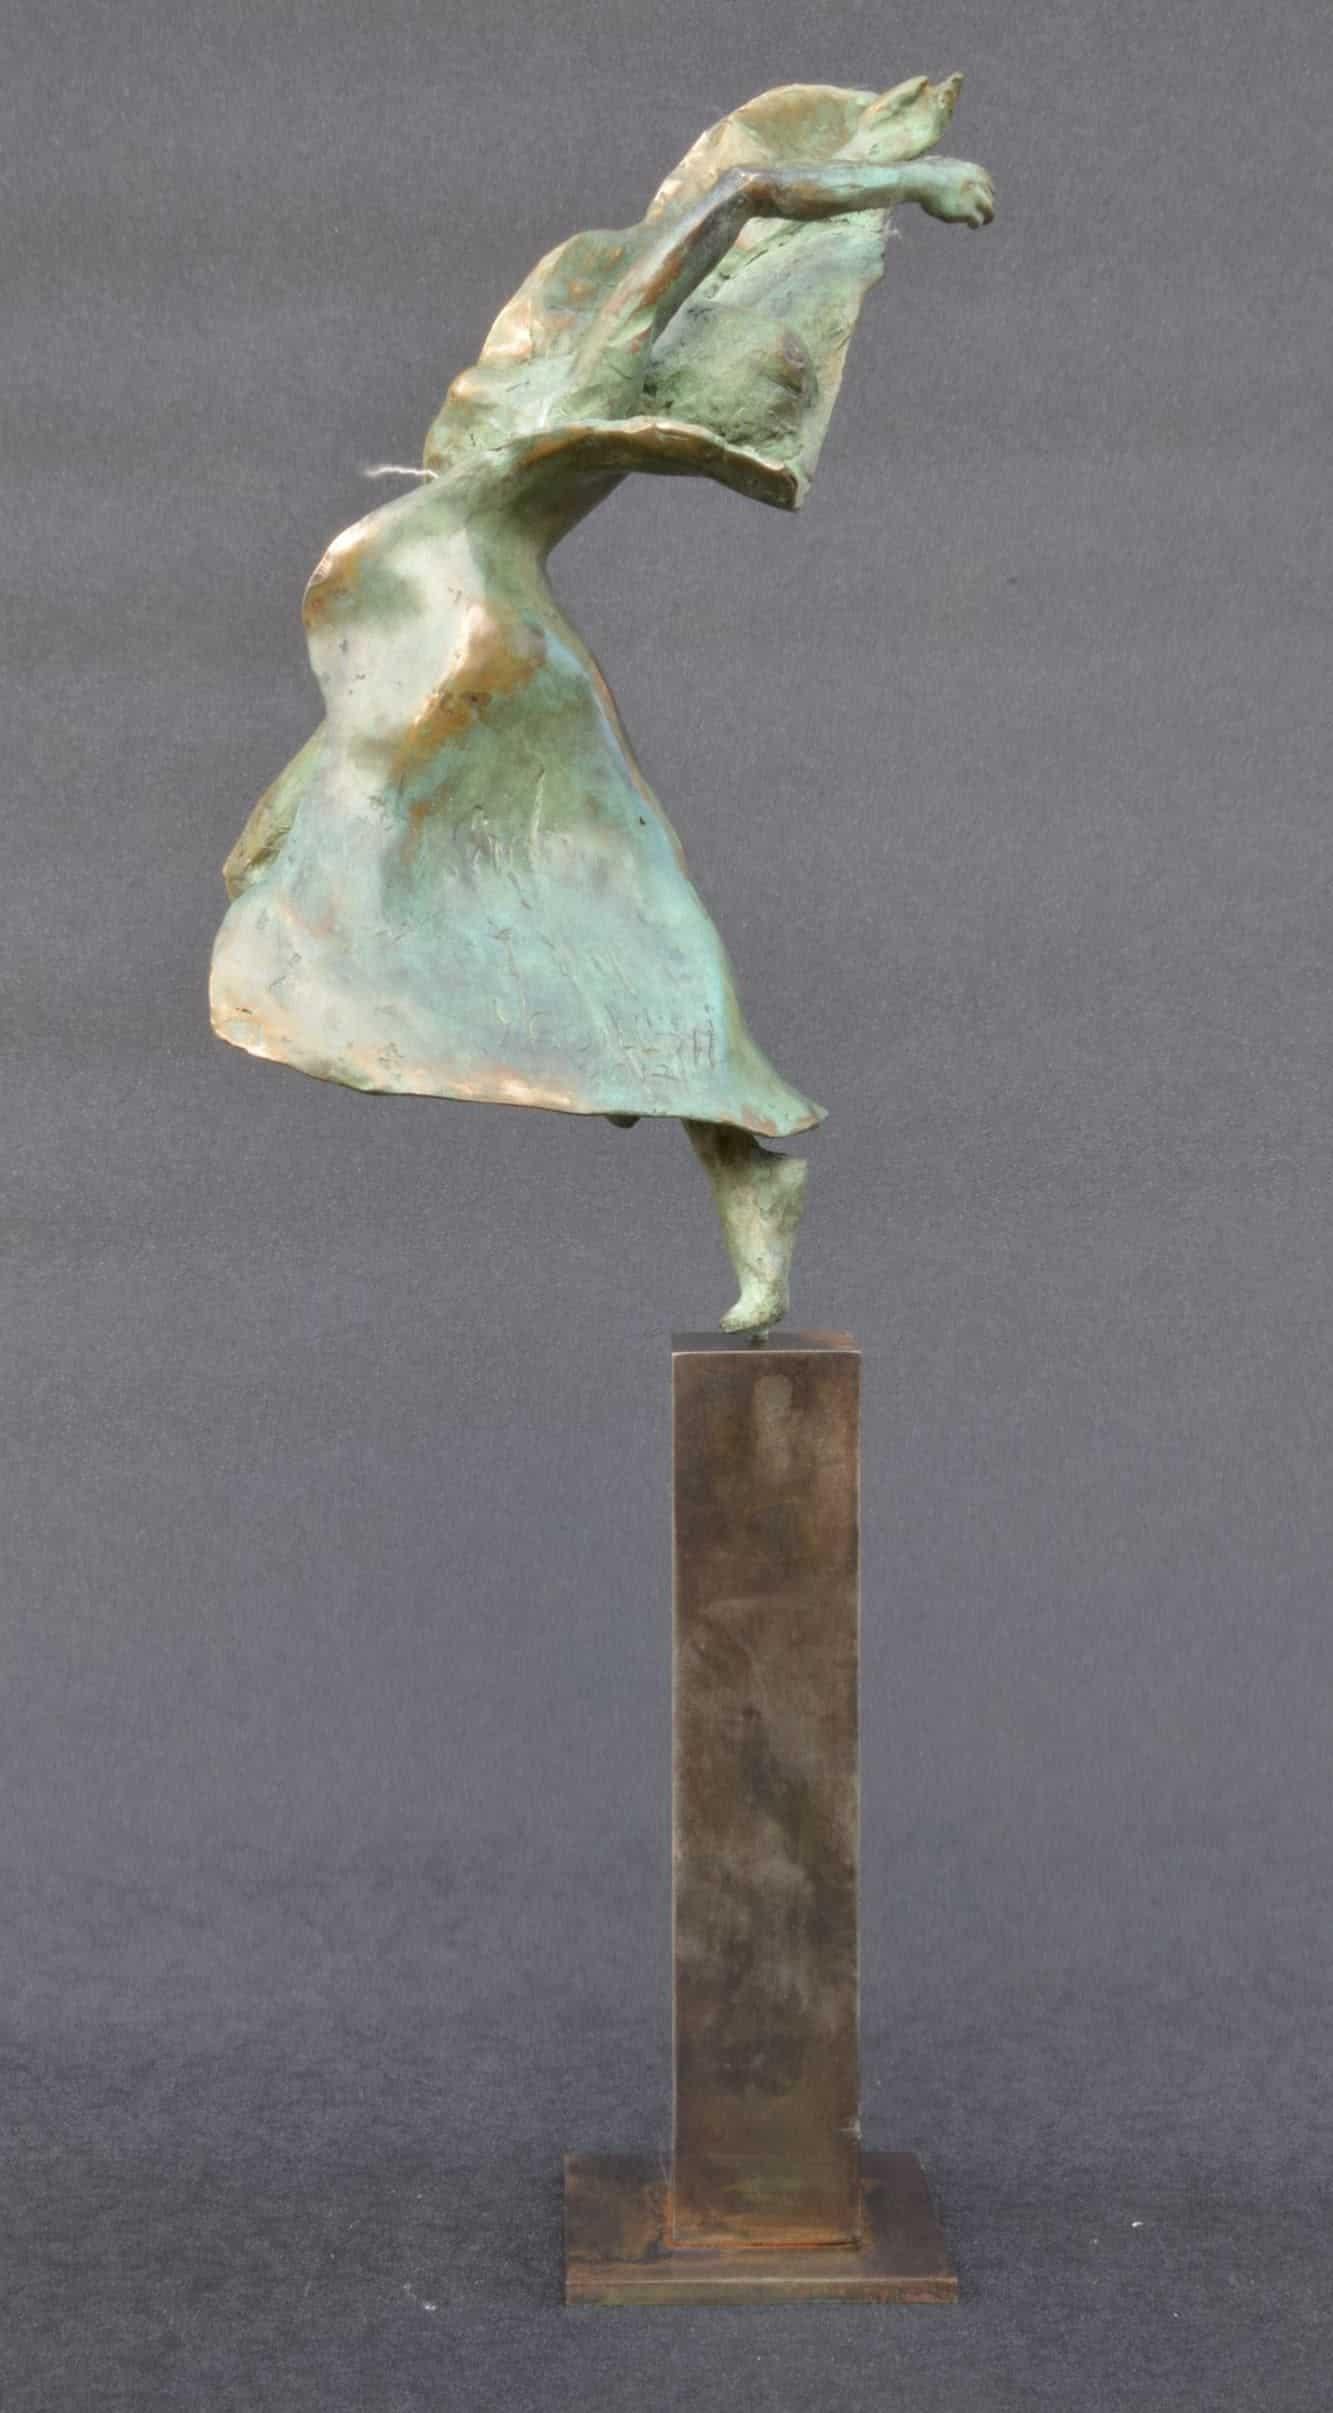 Modern dancer III is a bronze sculpture by contemporary artist Yann Guillon, dimensions are 33 x 14 × 8 cm (13 × 5.5 × 3.1 in). Height of the sculpture with the metal base: 48 cm (18.9 in). 
The sculpture is signed and numbered, it is part of a